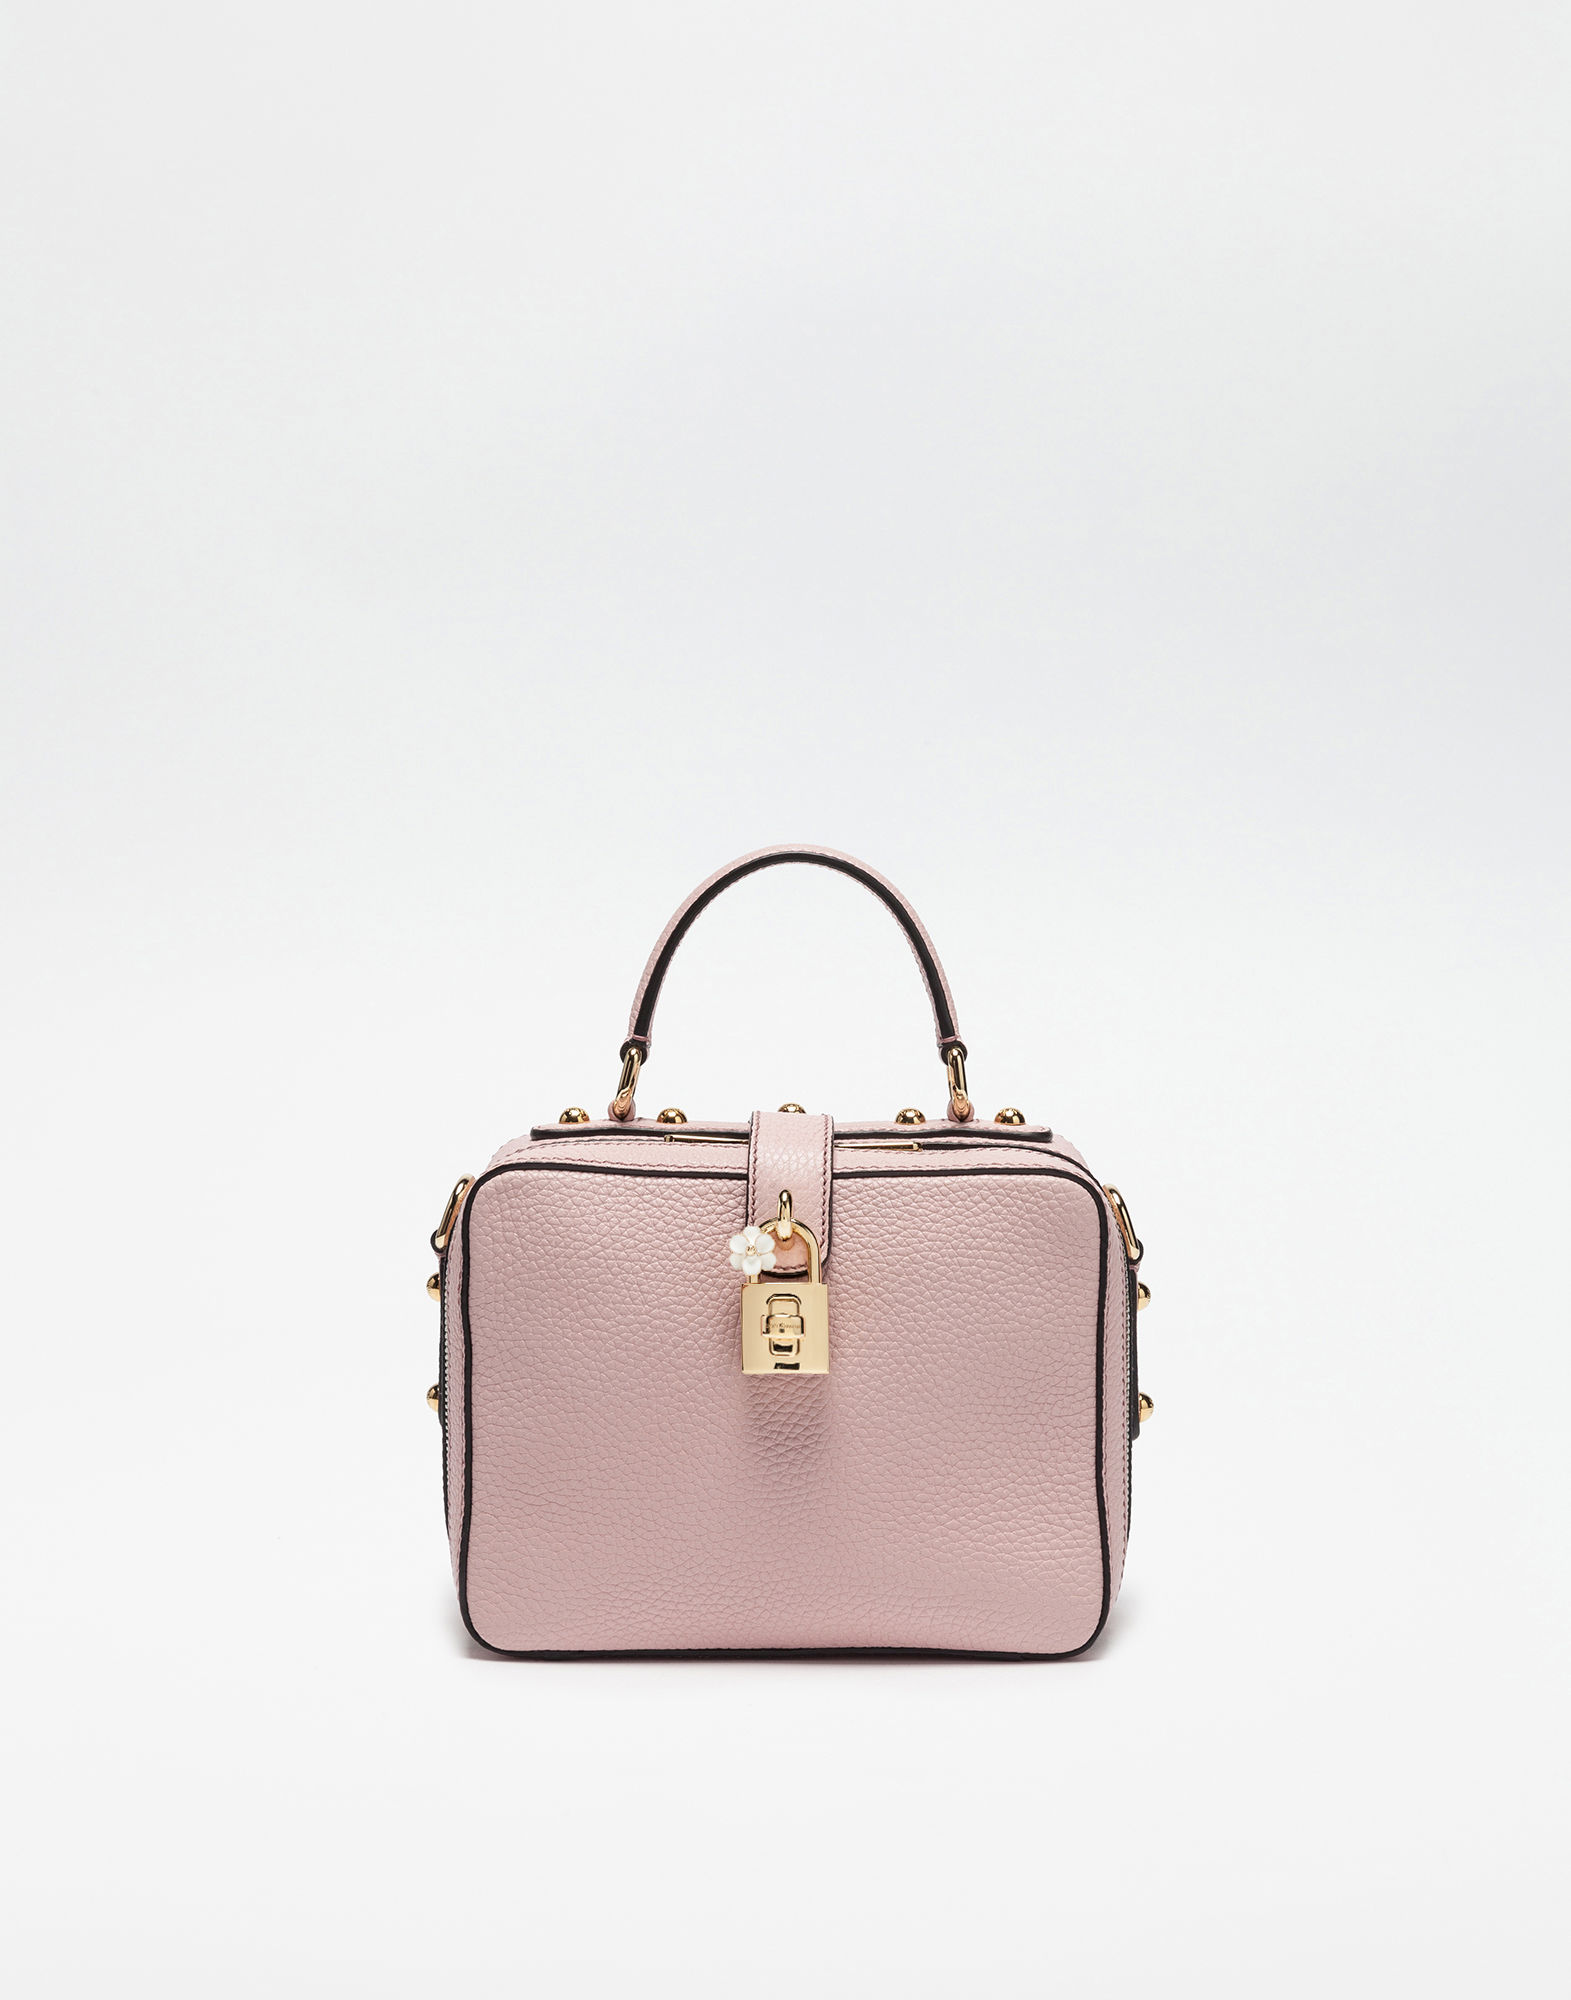 Dolce & Gabbana Dolce Soft Bag In Matelassé Nappa Leather In Pink ...